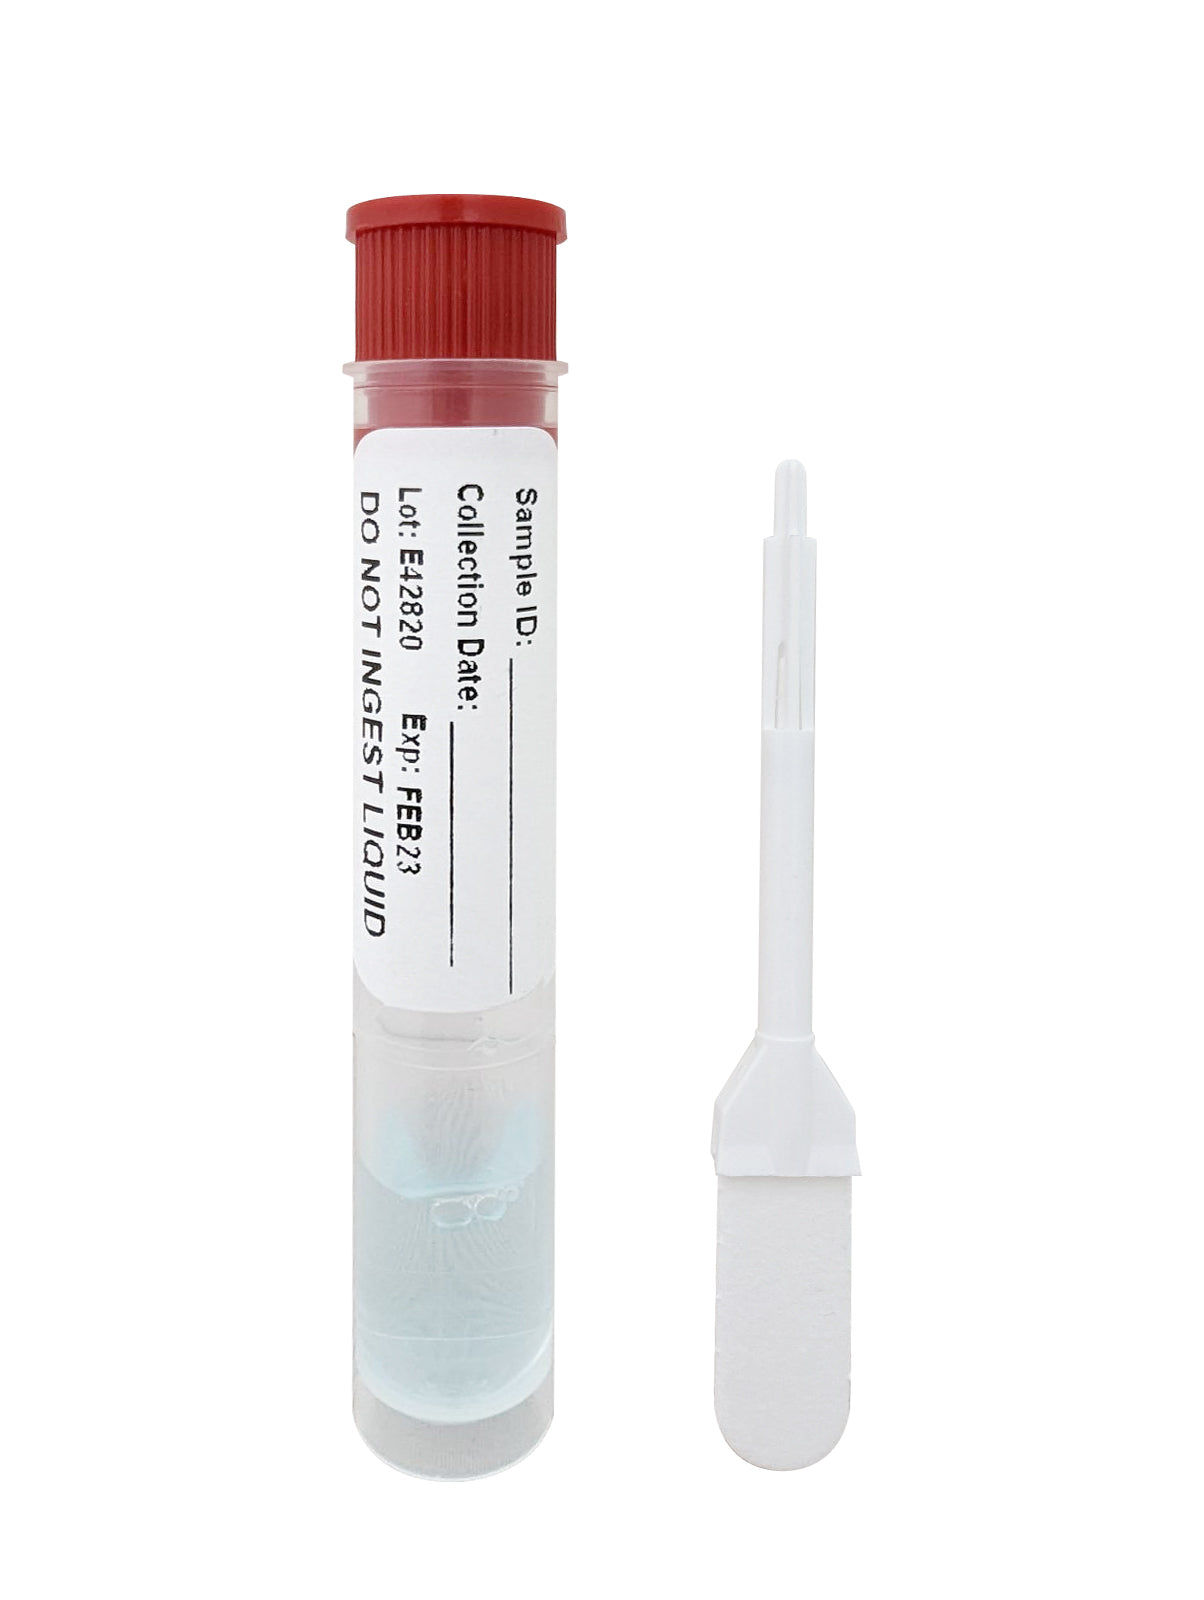 Quantisal™ Oral Fluid Collection Device (For Laboratory Testing)